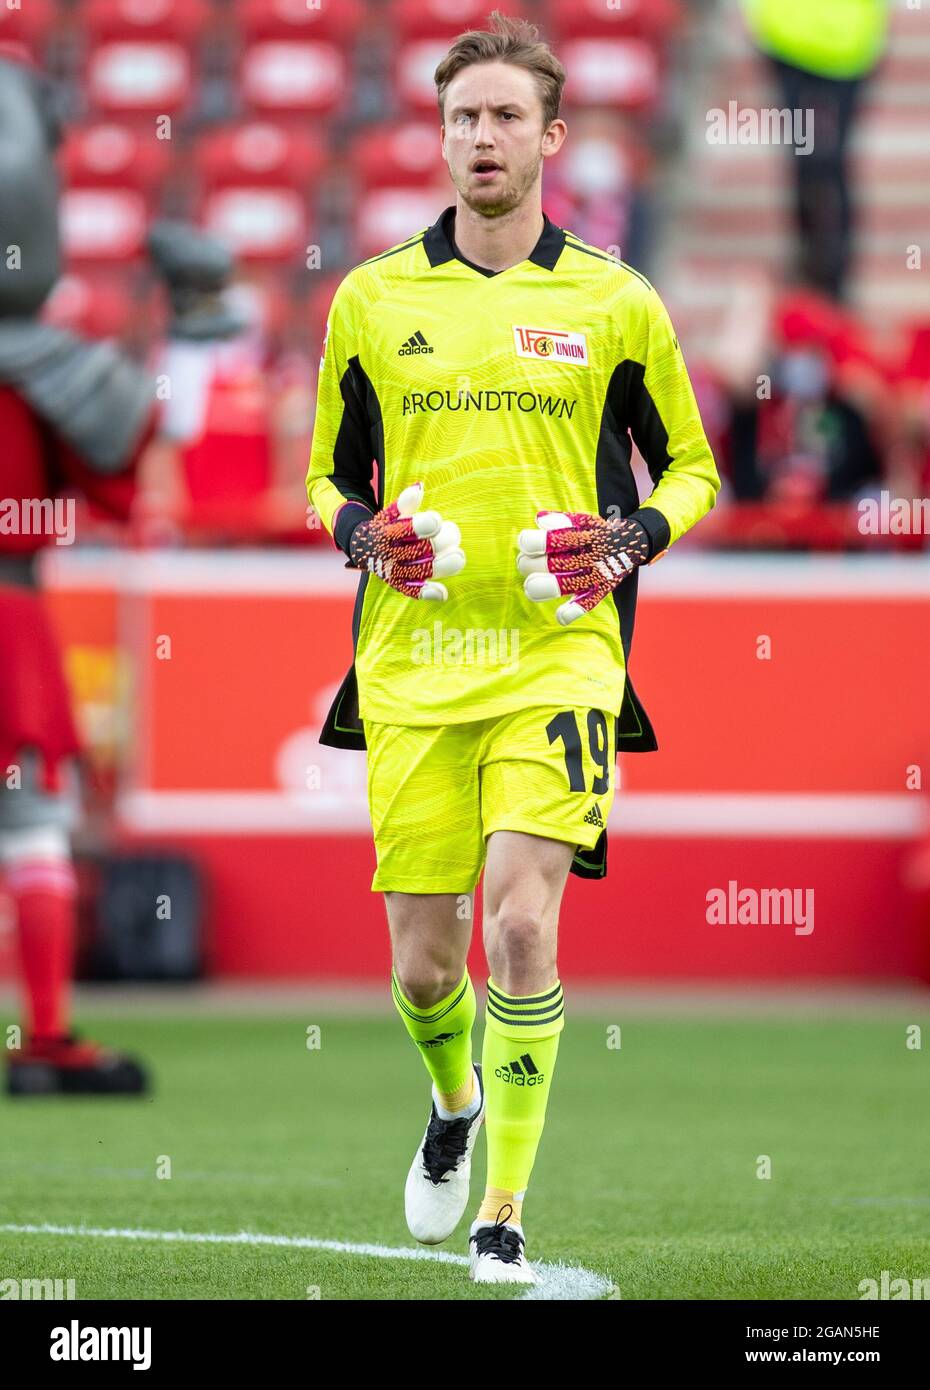 Berlin, Germany. 31st July, 2021. Football: Test matches, 1. FC Union Berlin - Athletic Bilbao, Stadion An der Alten Försterei. Goalkeeper Frederik Rönnow of Union Berlin enters the pitch during the team presentation. Credit: Andreas Gora/dpa/Alamy Live News Stock Photo